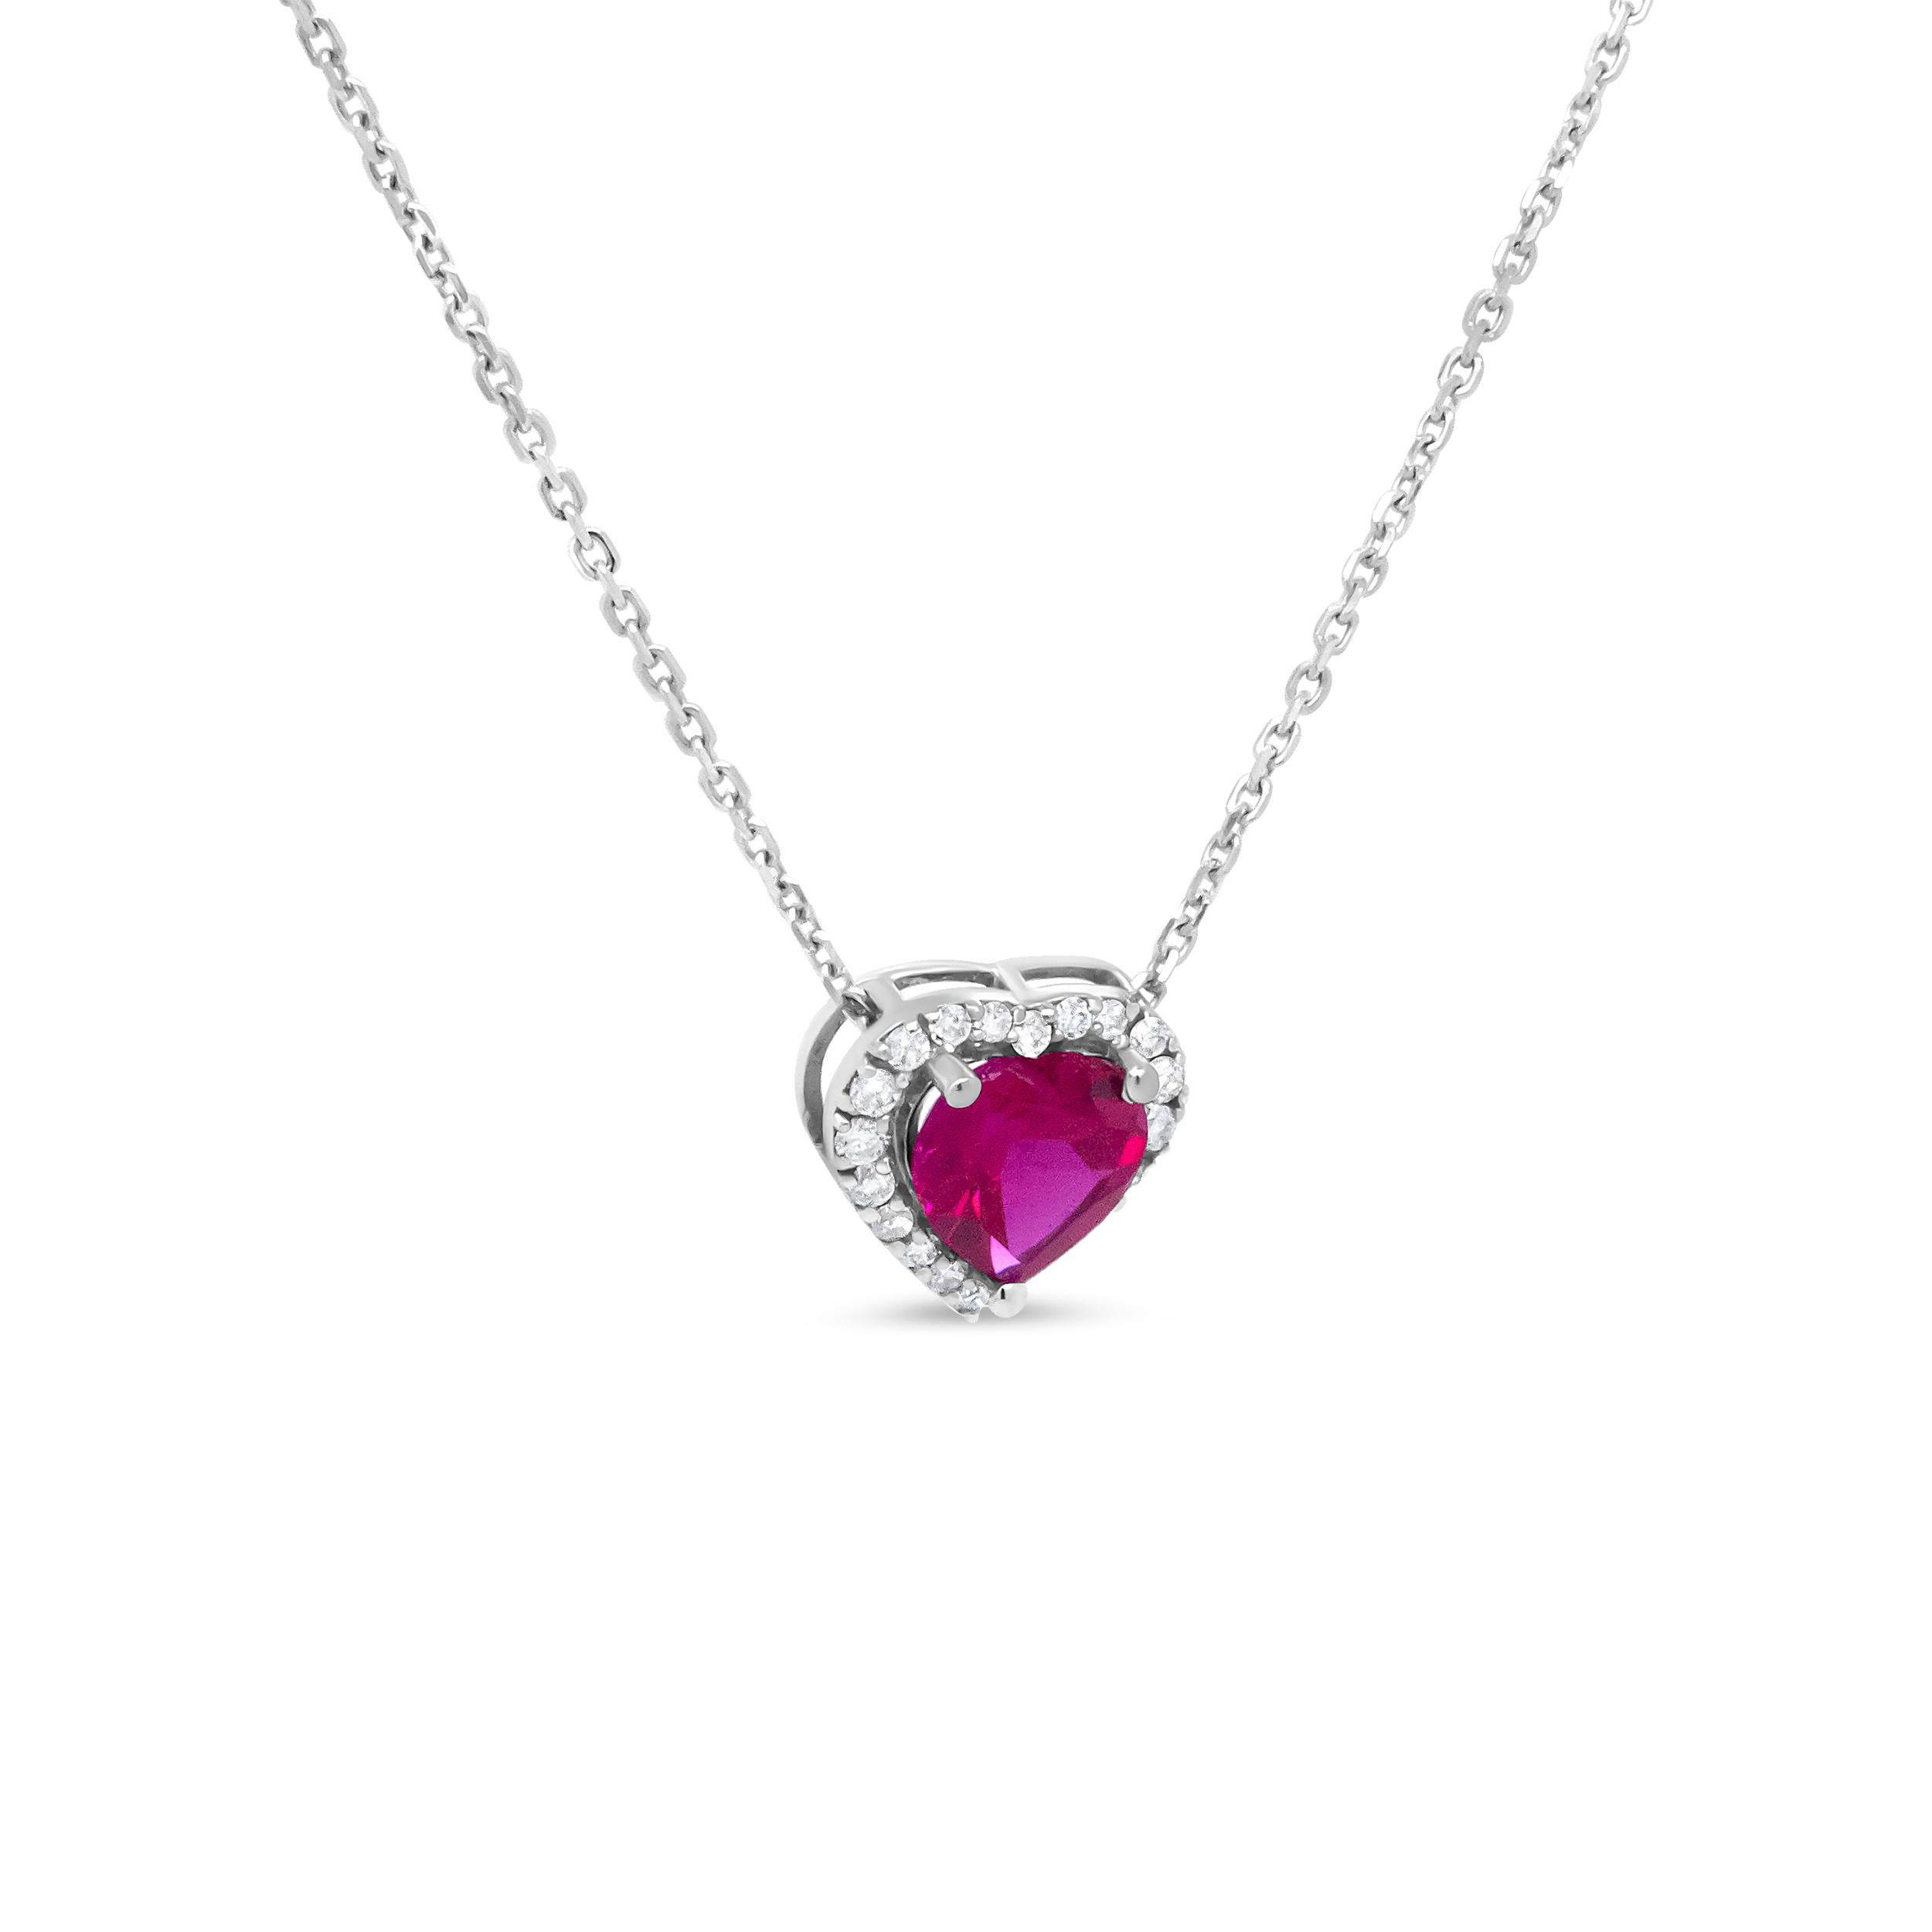 A sweet little pendant with mega sparkle, this elegant 18k white gold pendant necklace is meticulously crafted with romantic flair. A 6.7 x 7mm heart-shaped, glass-filled ruby in a color-treated red hue centers this pendant in a 3-prong setting.